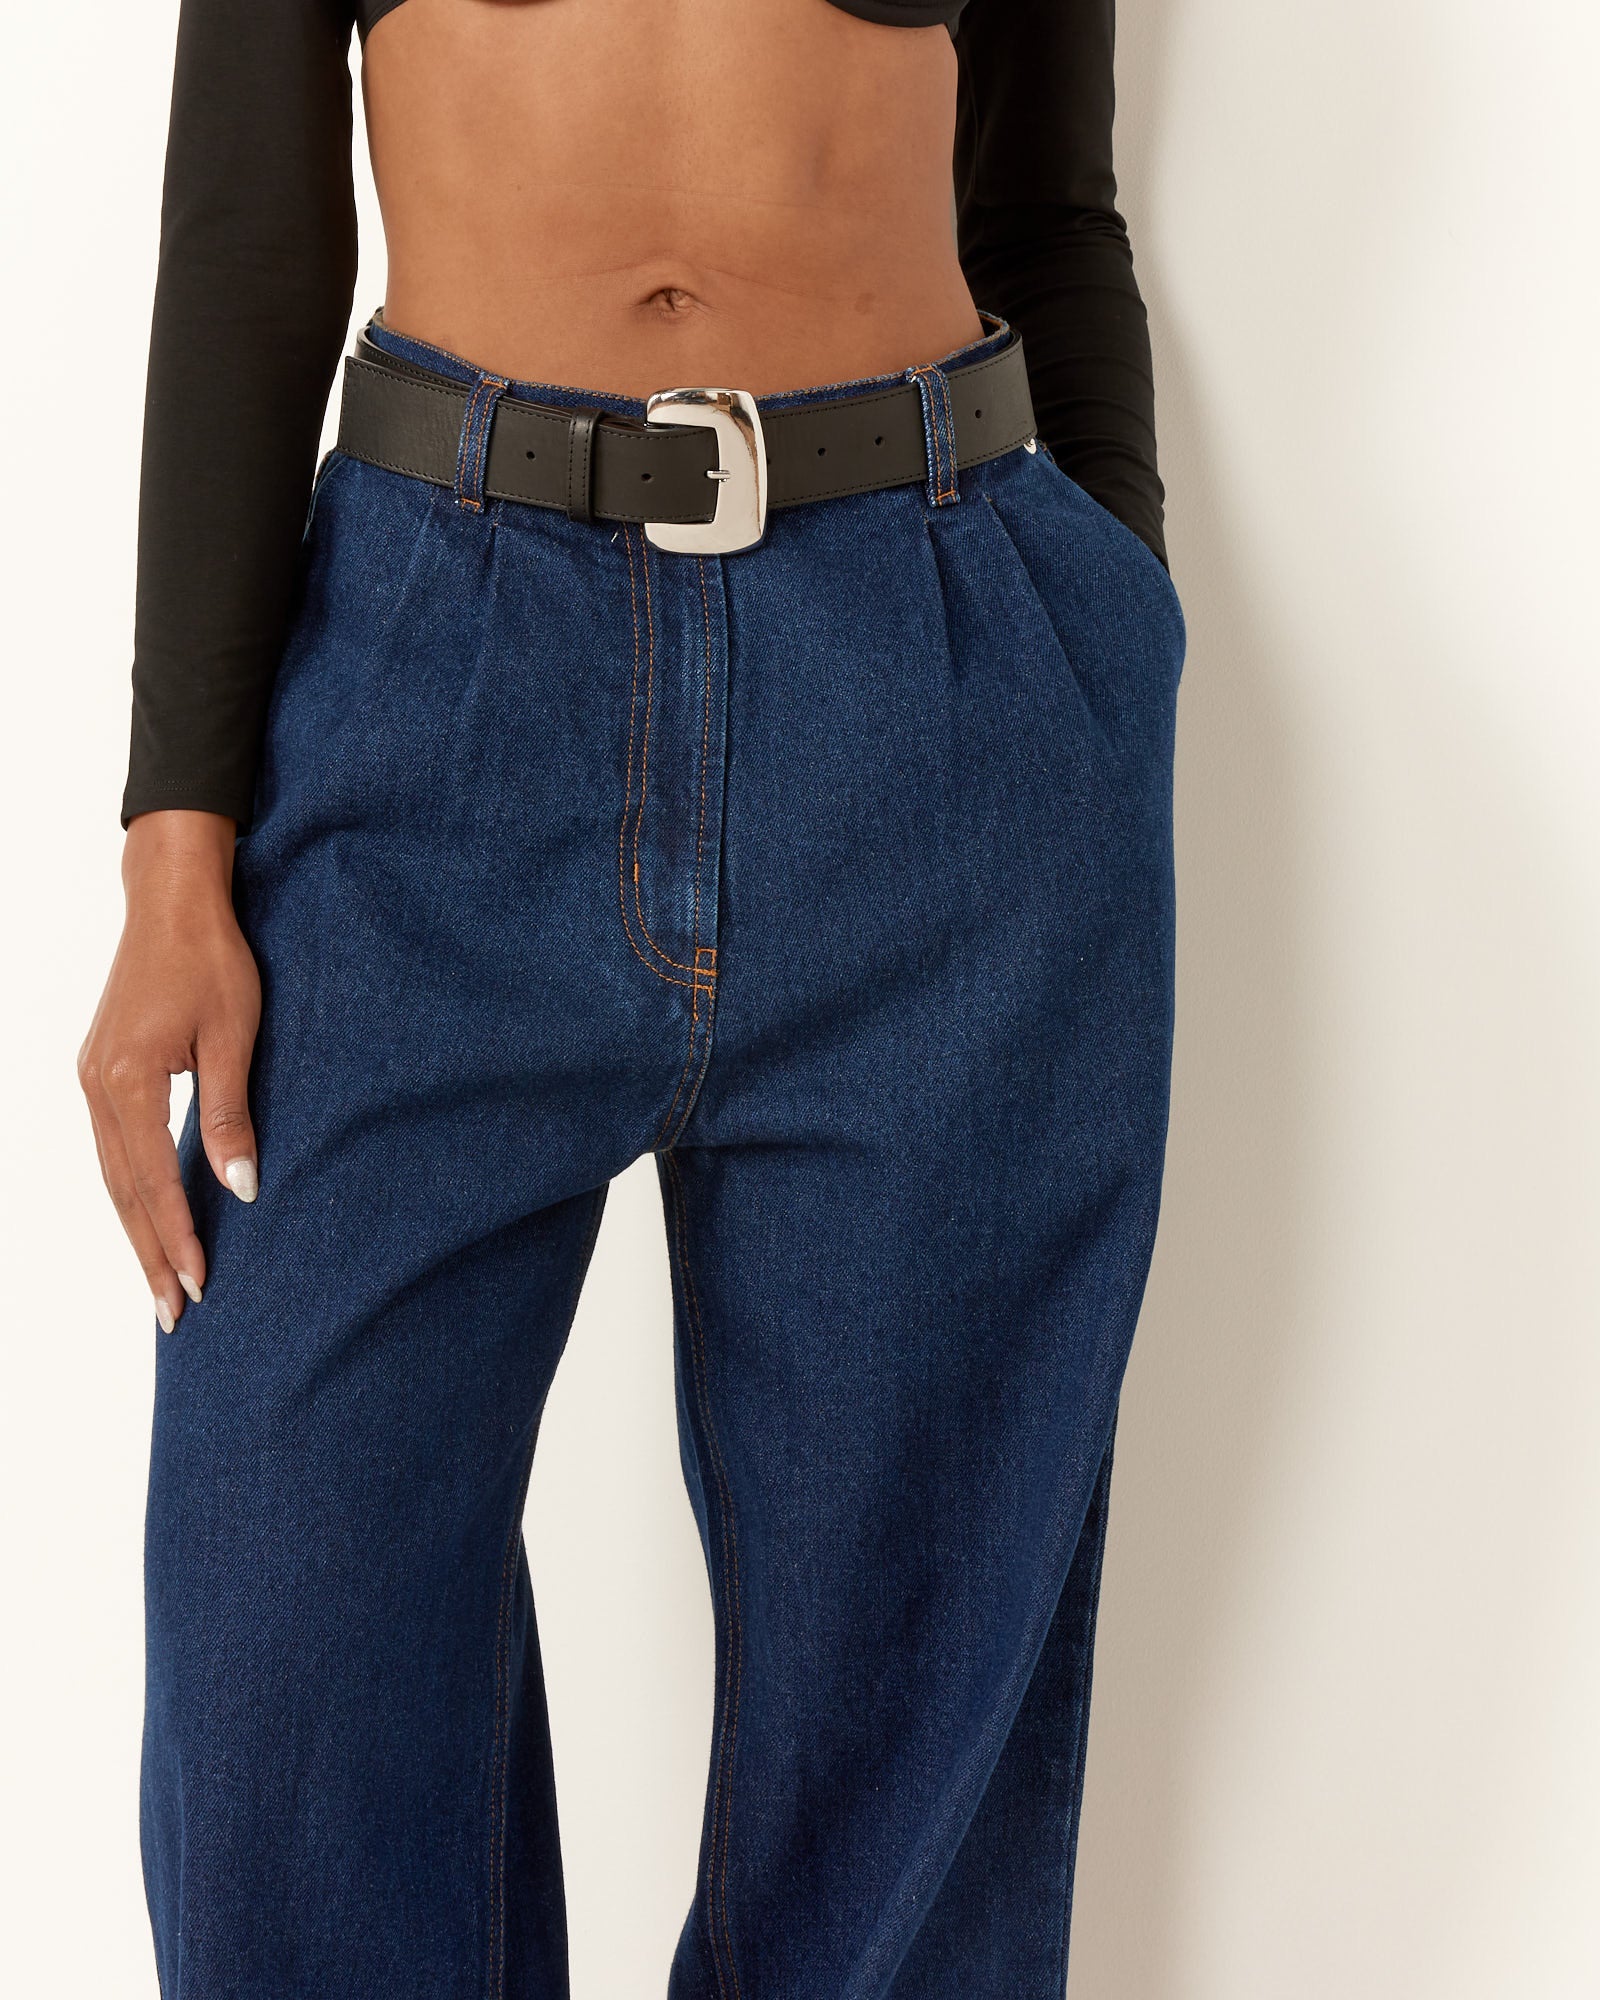 Haring Trouser in Blue Wash